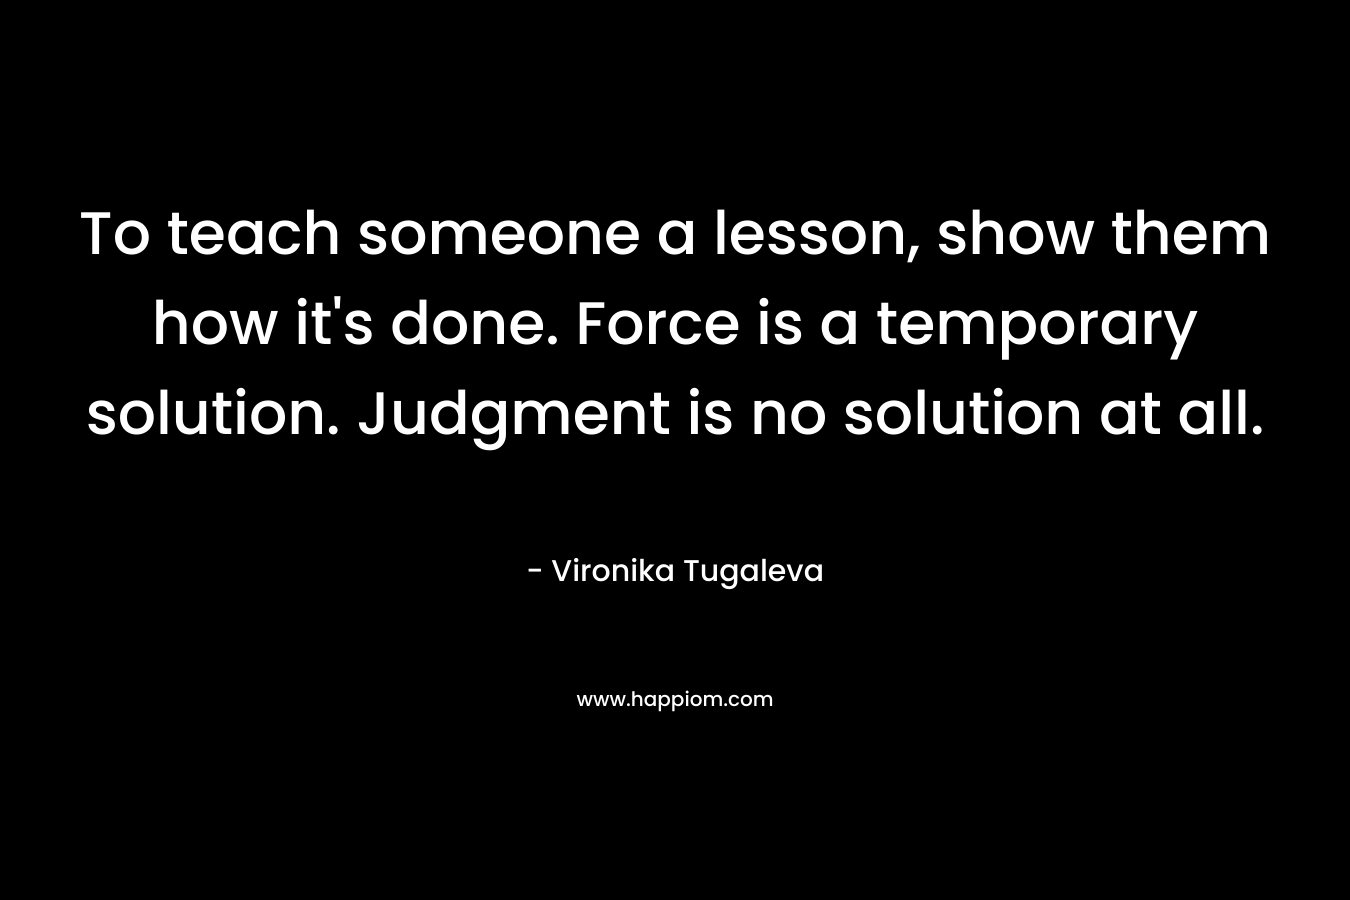 To teach someone a lesson, show them how it's done. Force is a temporary solution. Judgment is no solution at all.